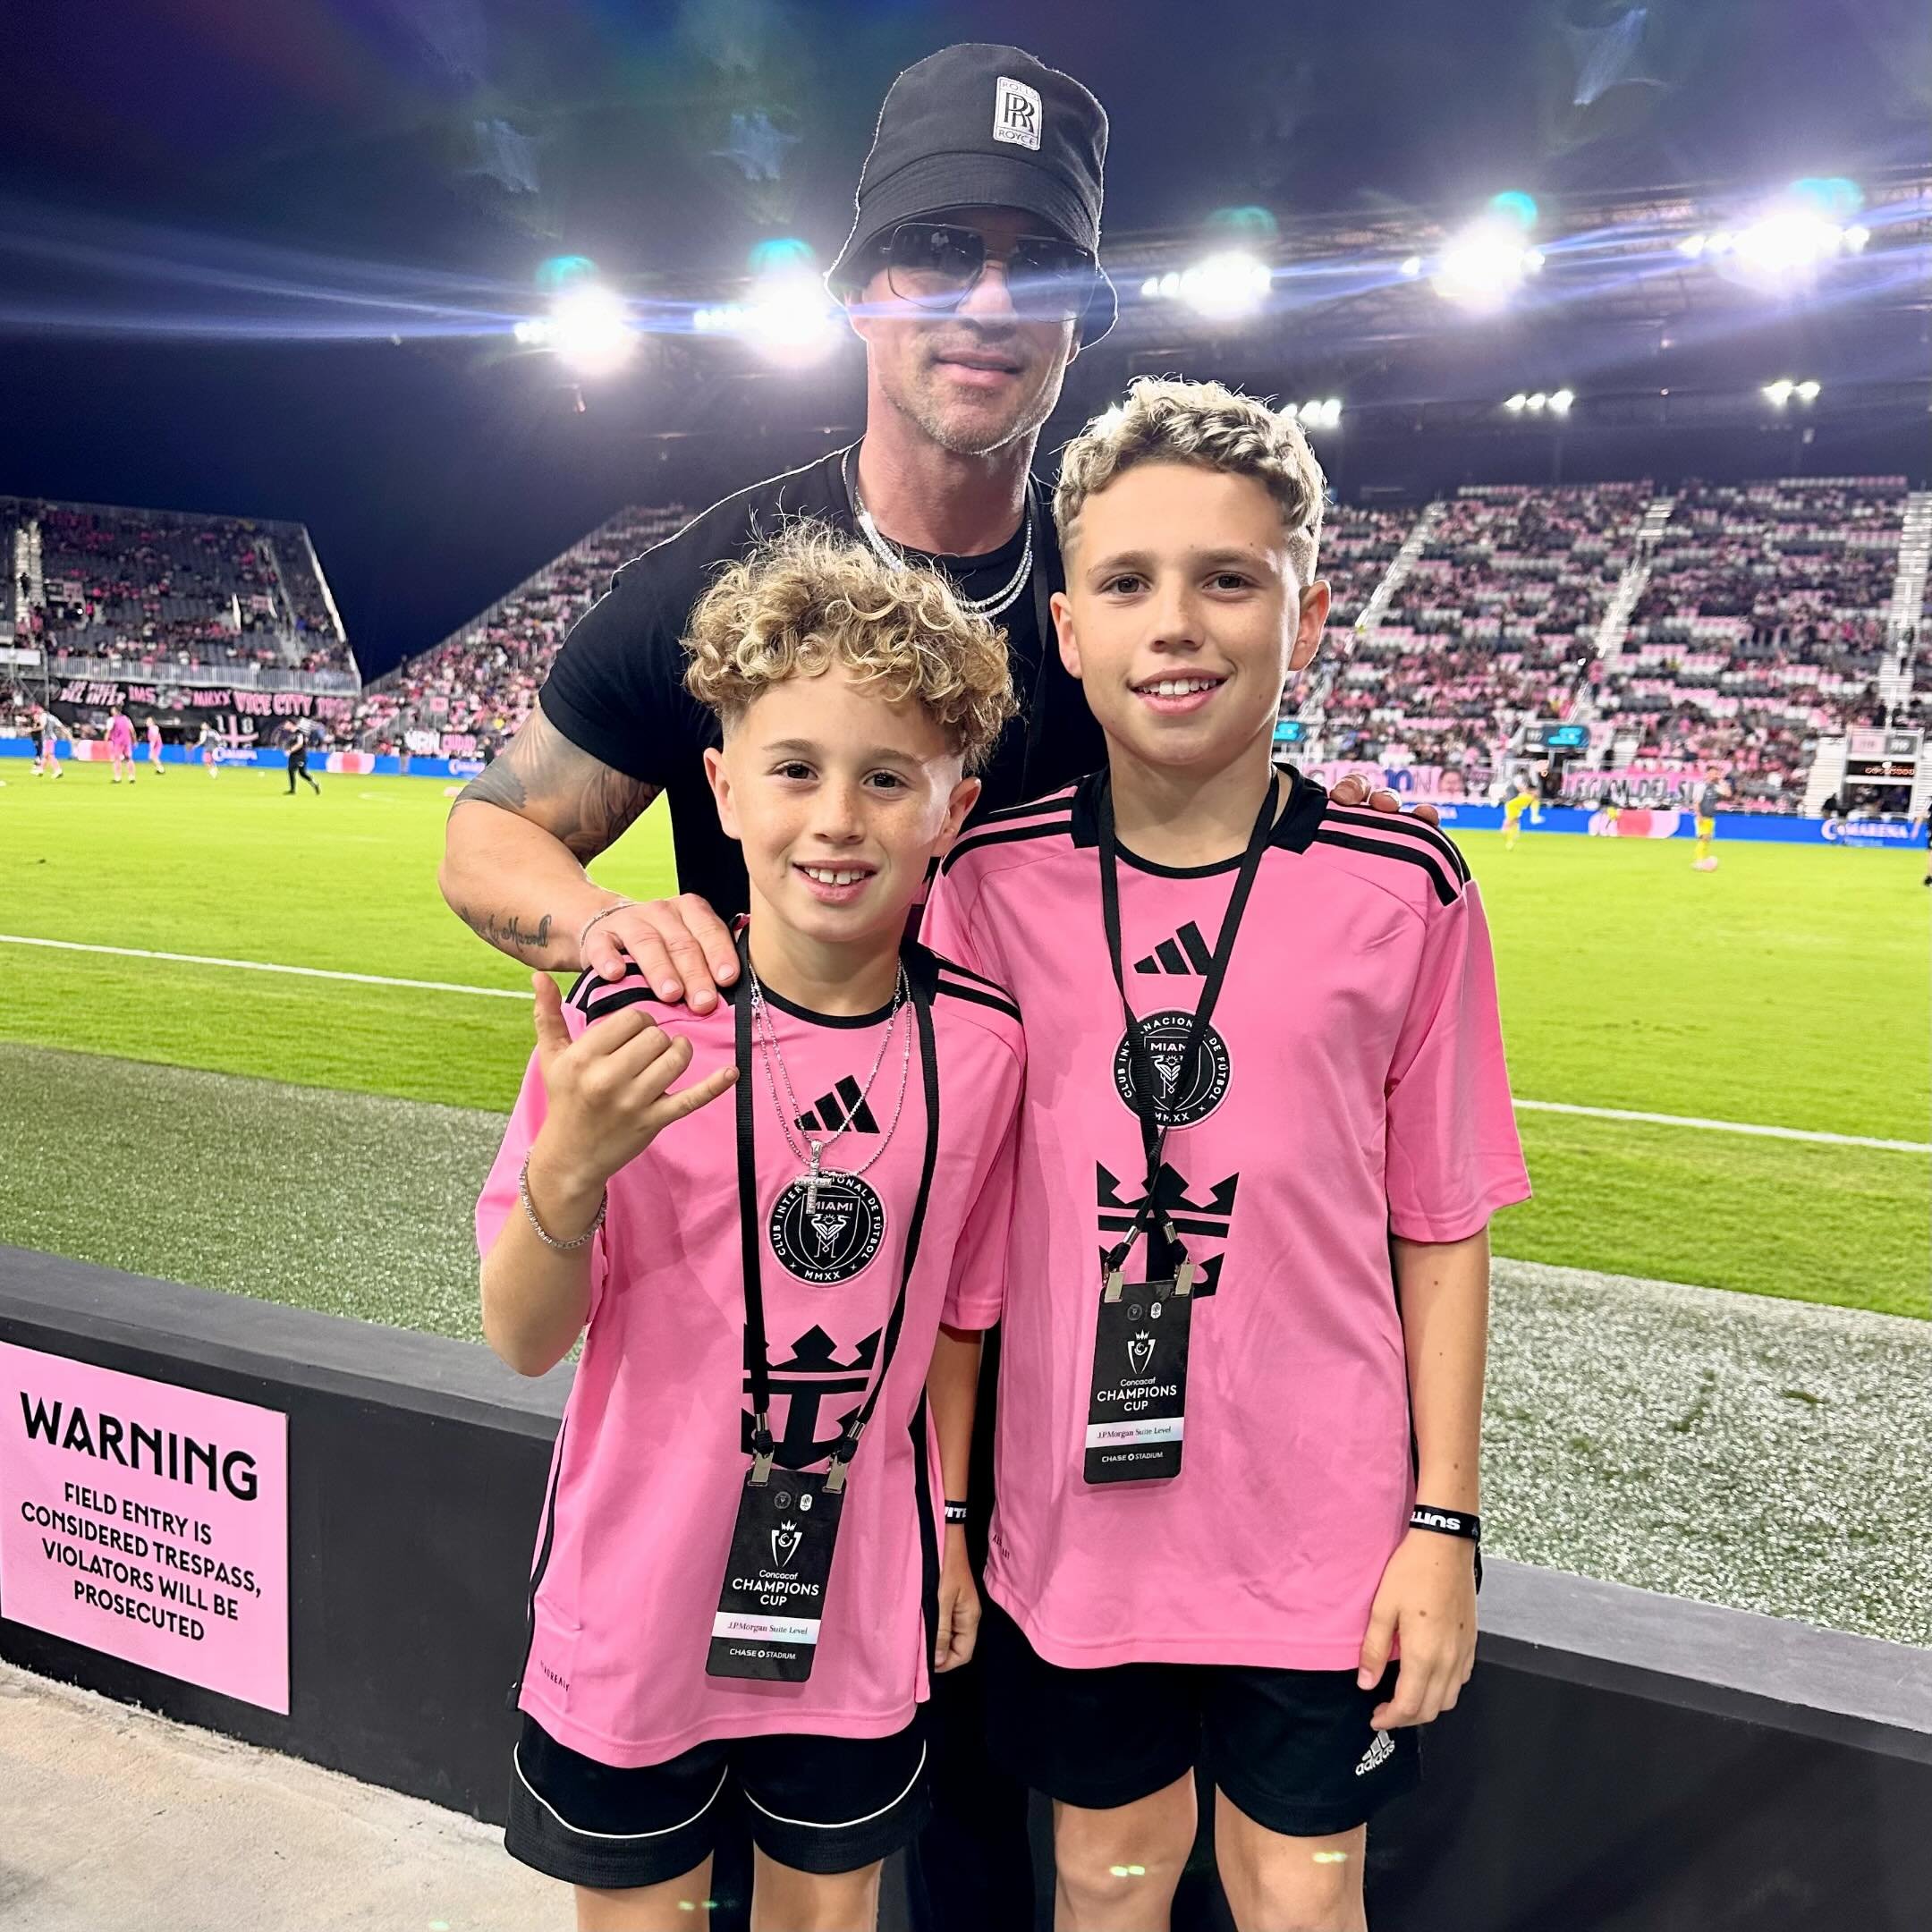 Sharing the thrill of Inter Miami games with my boys isn't just about soccer; it's a vital part of our father-son bond.

Here's to more games, more goals, and more moments that shape us as a family.